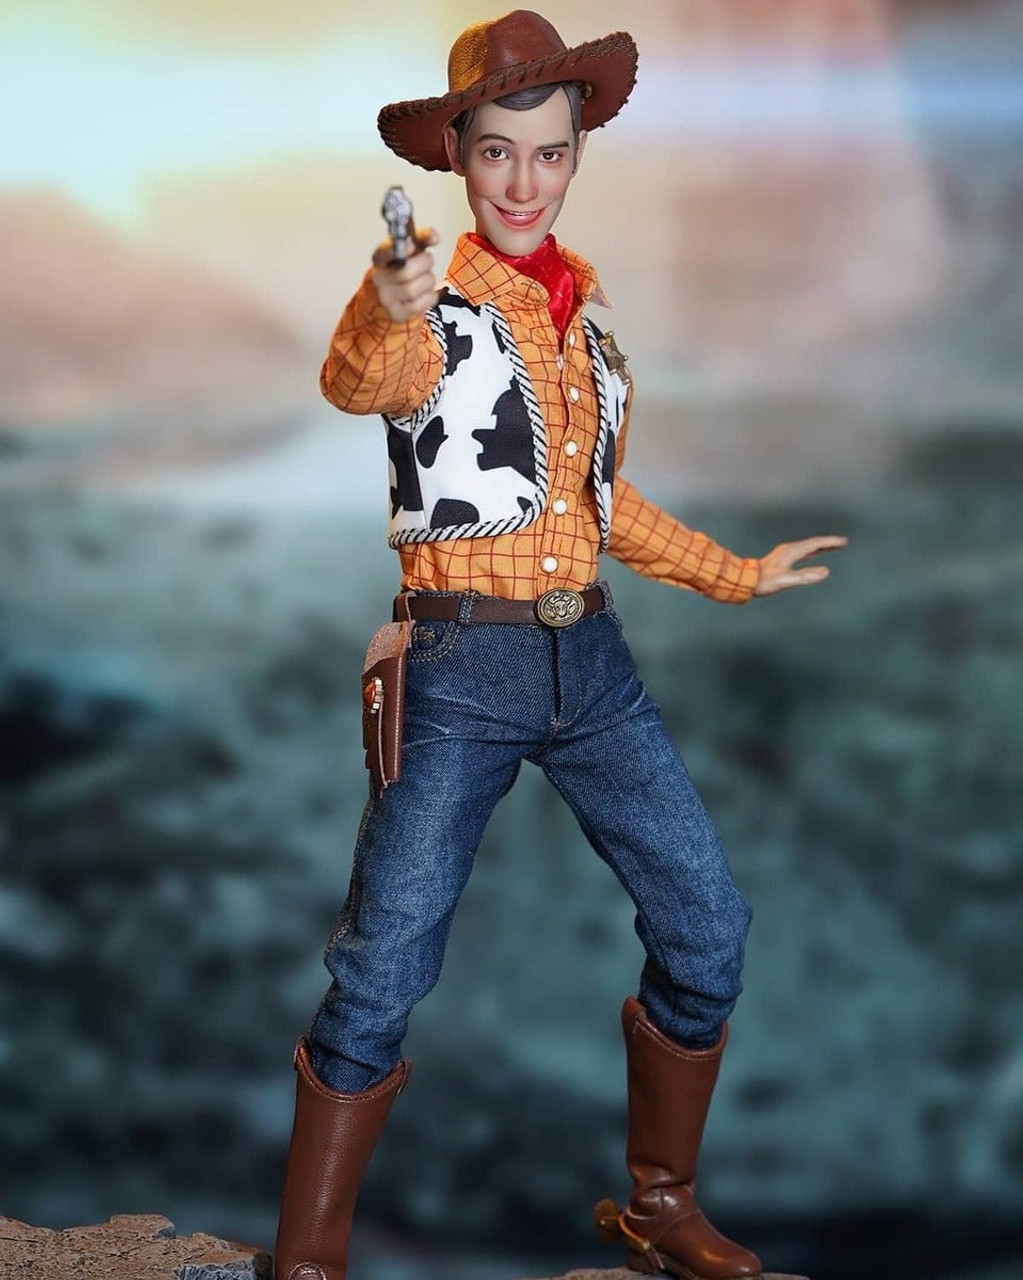 Play Toy Happy Cowboy P015 Woody 1/6 Scale Action Figure